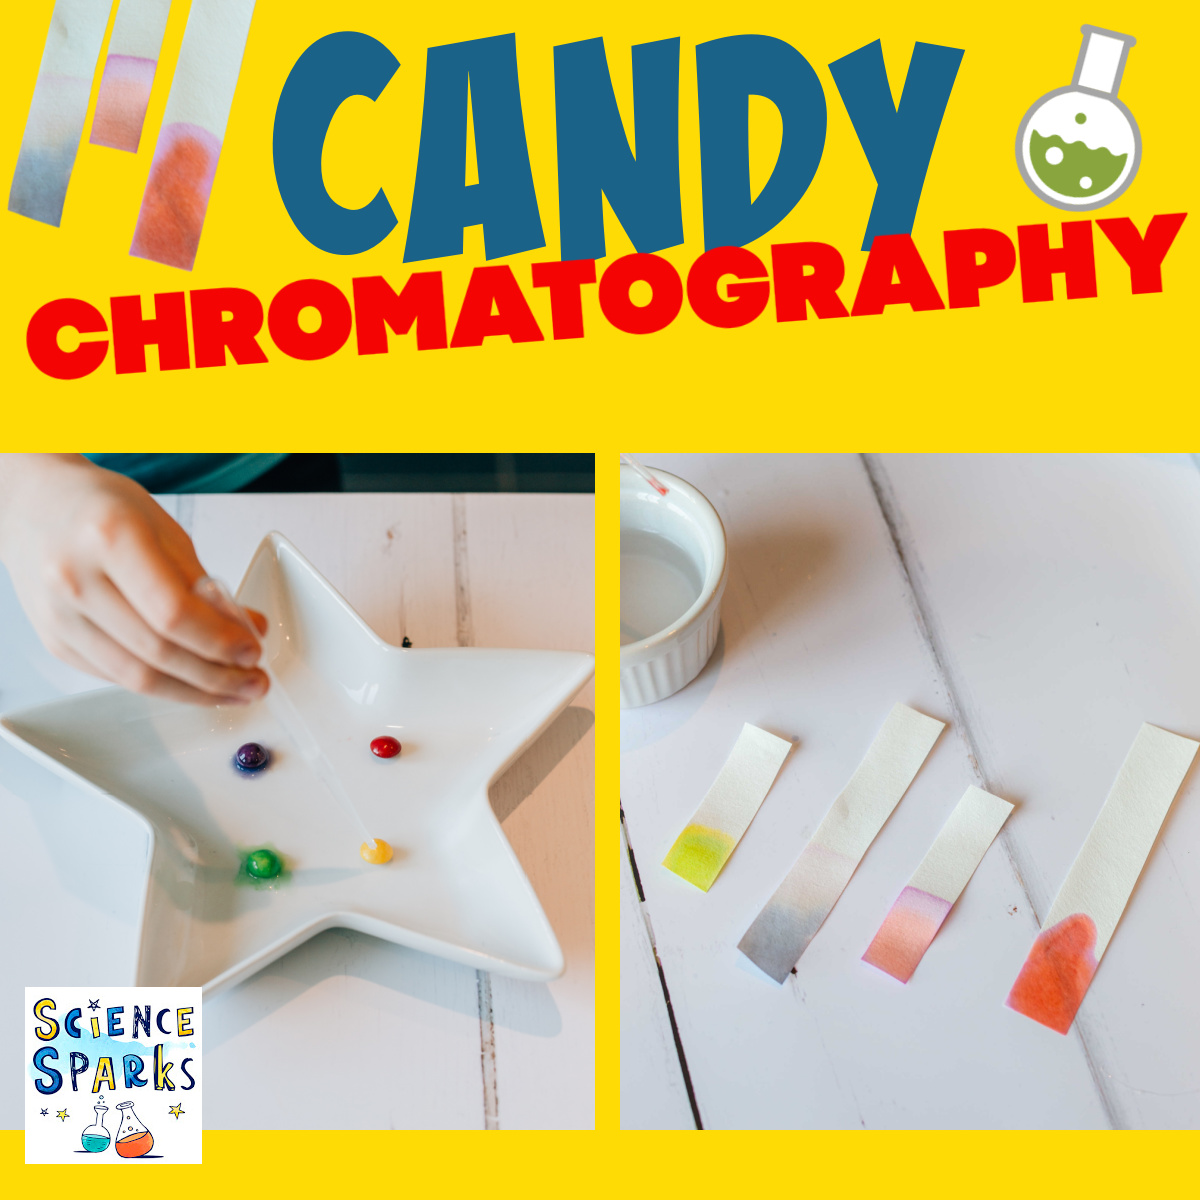 Candy chromatography experiment